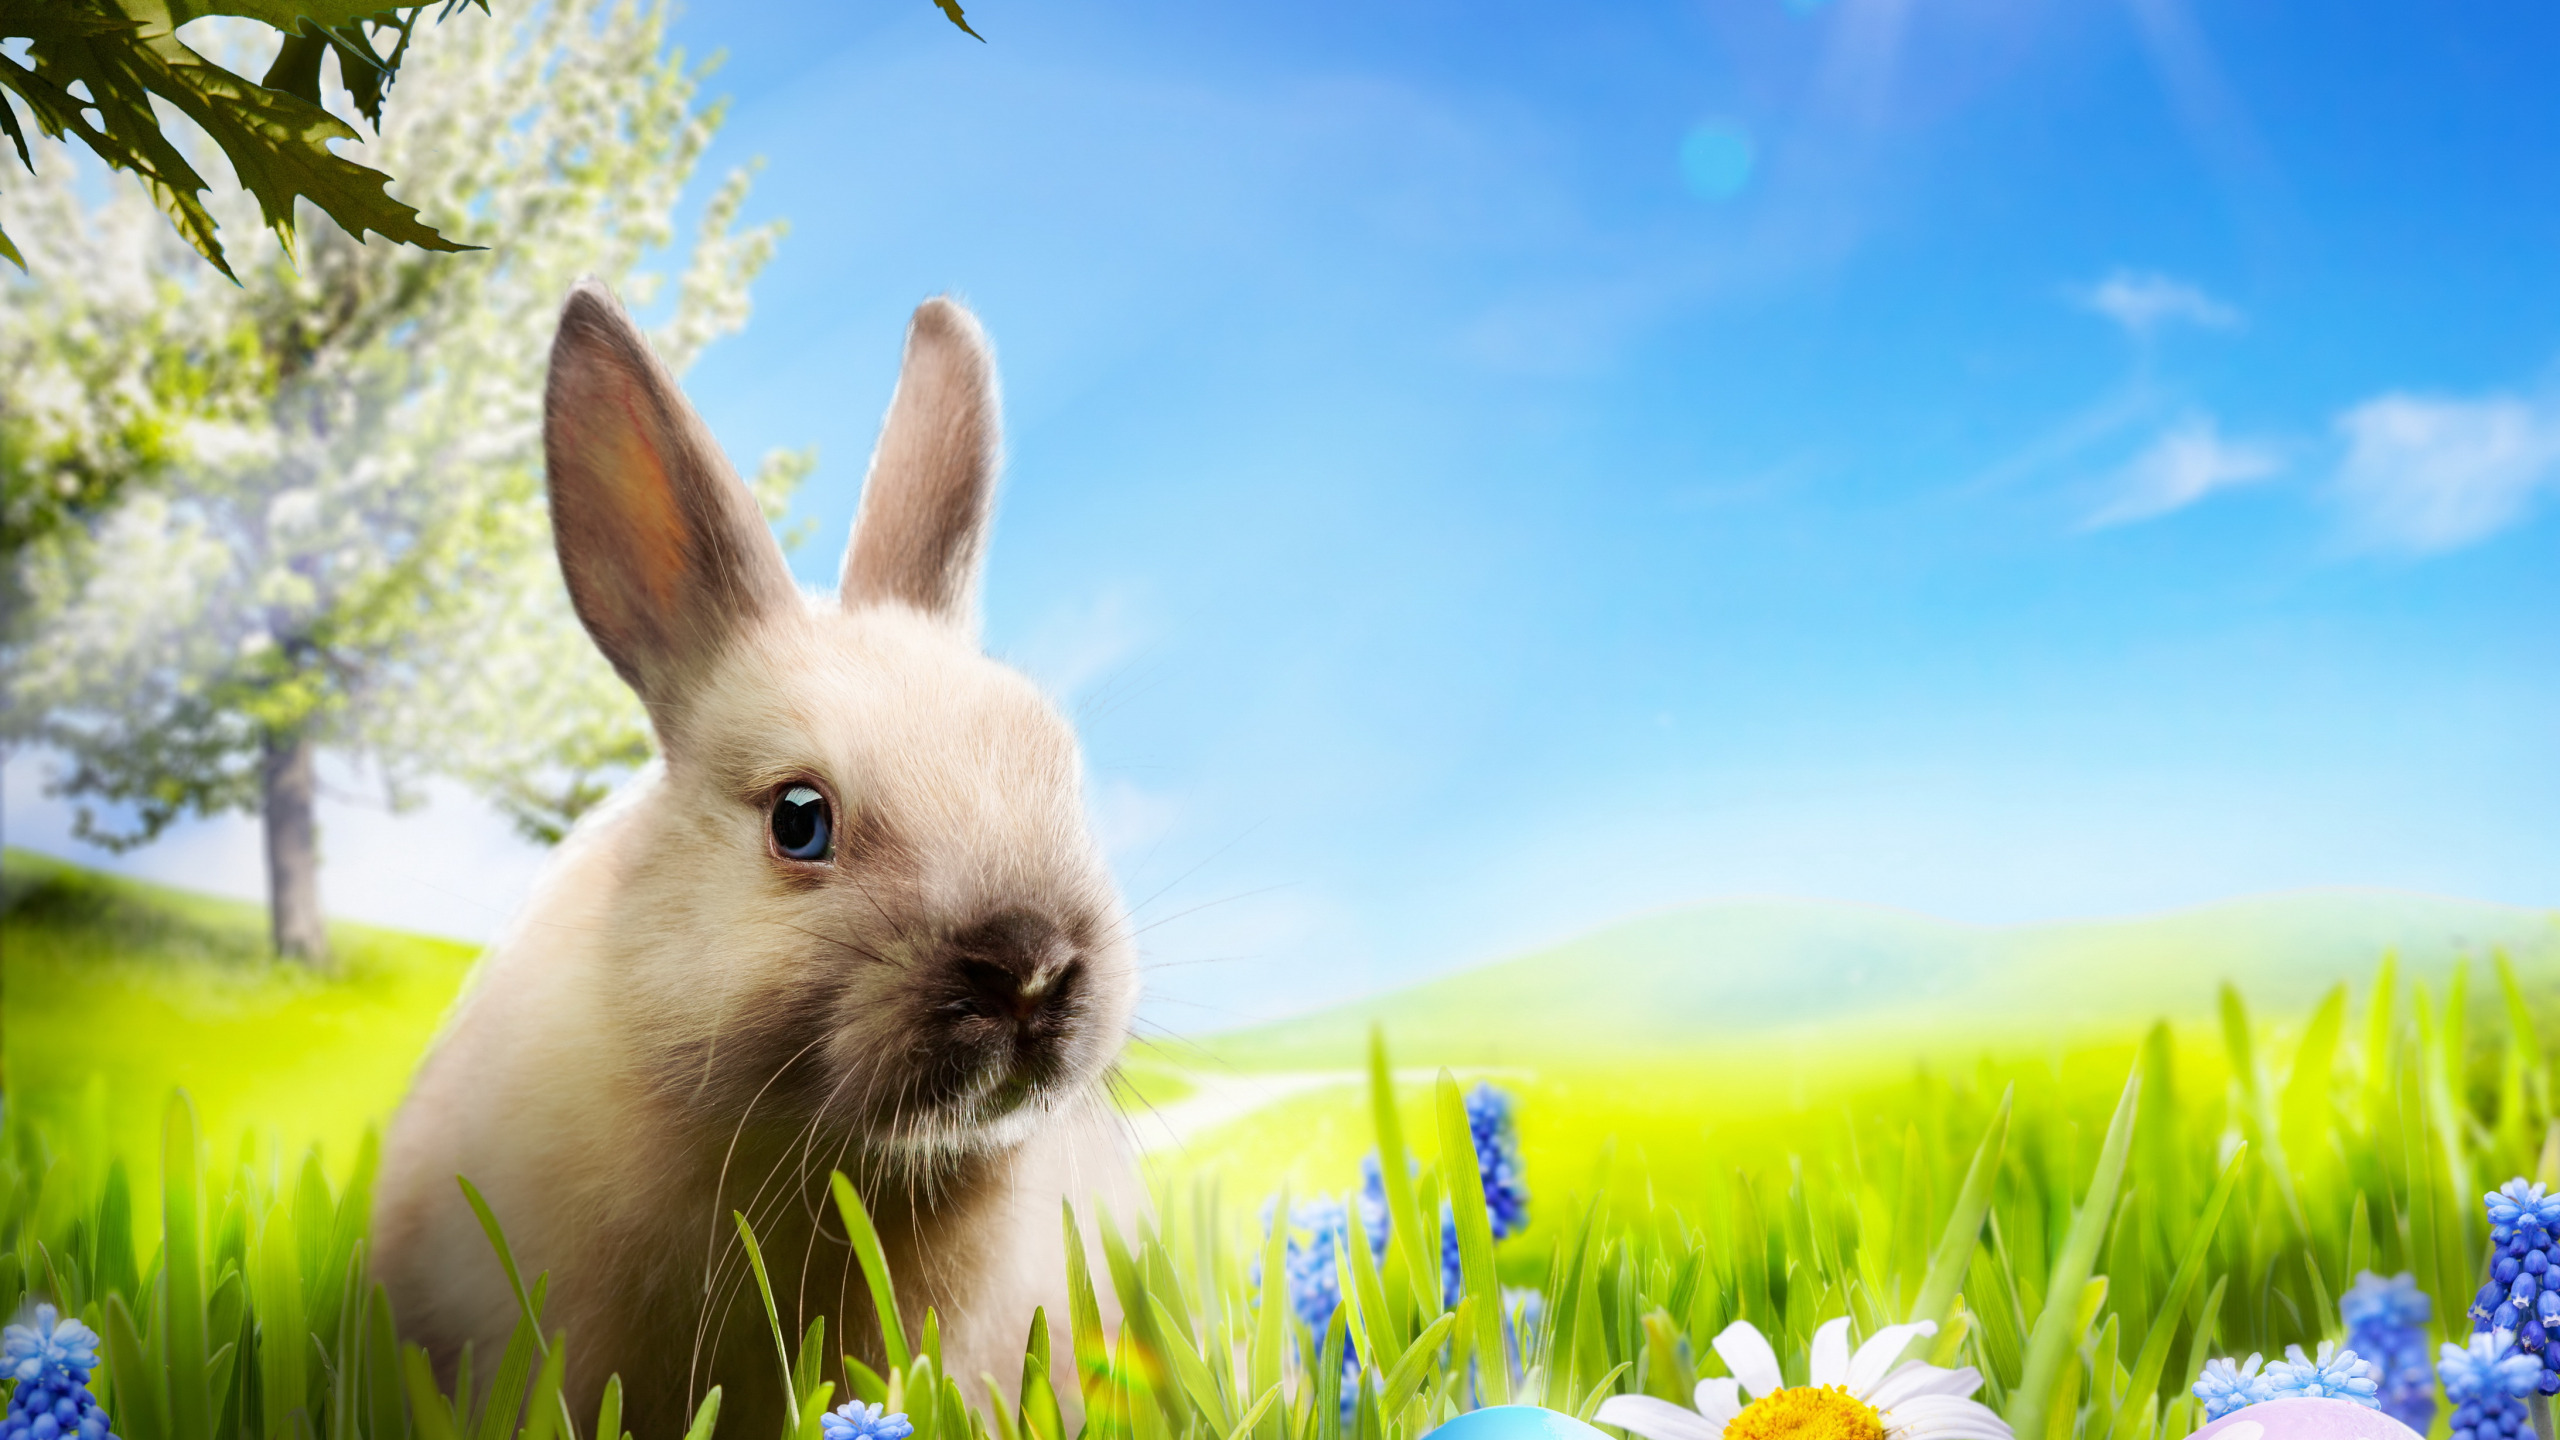 Download wallpaper grass, flowers, chamomile, eggs, spring, rabbit, meadow,  Easter, grass, sunshine, rabbit, flowers, spring, Easter, eggs, easter,  section holidays in resolution 2560x1440